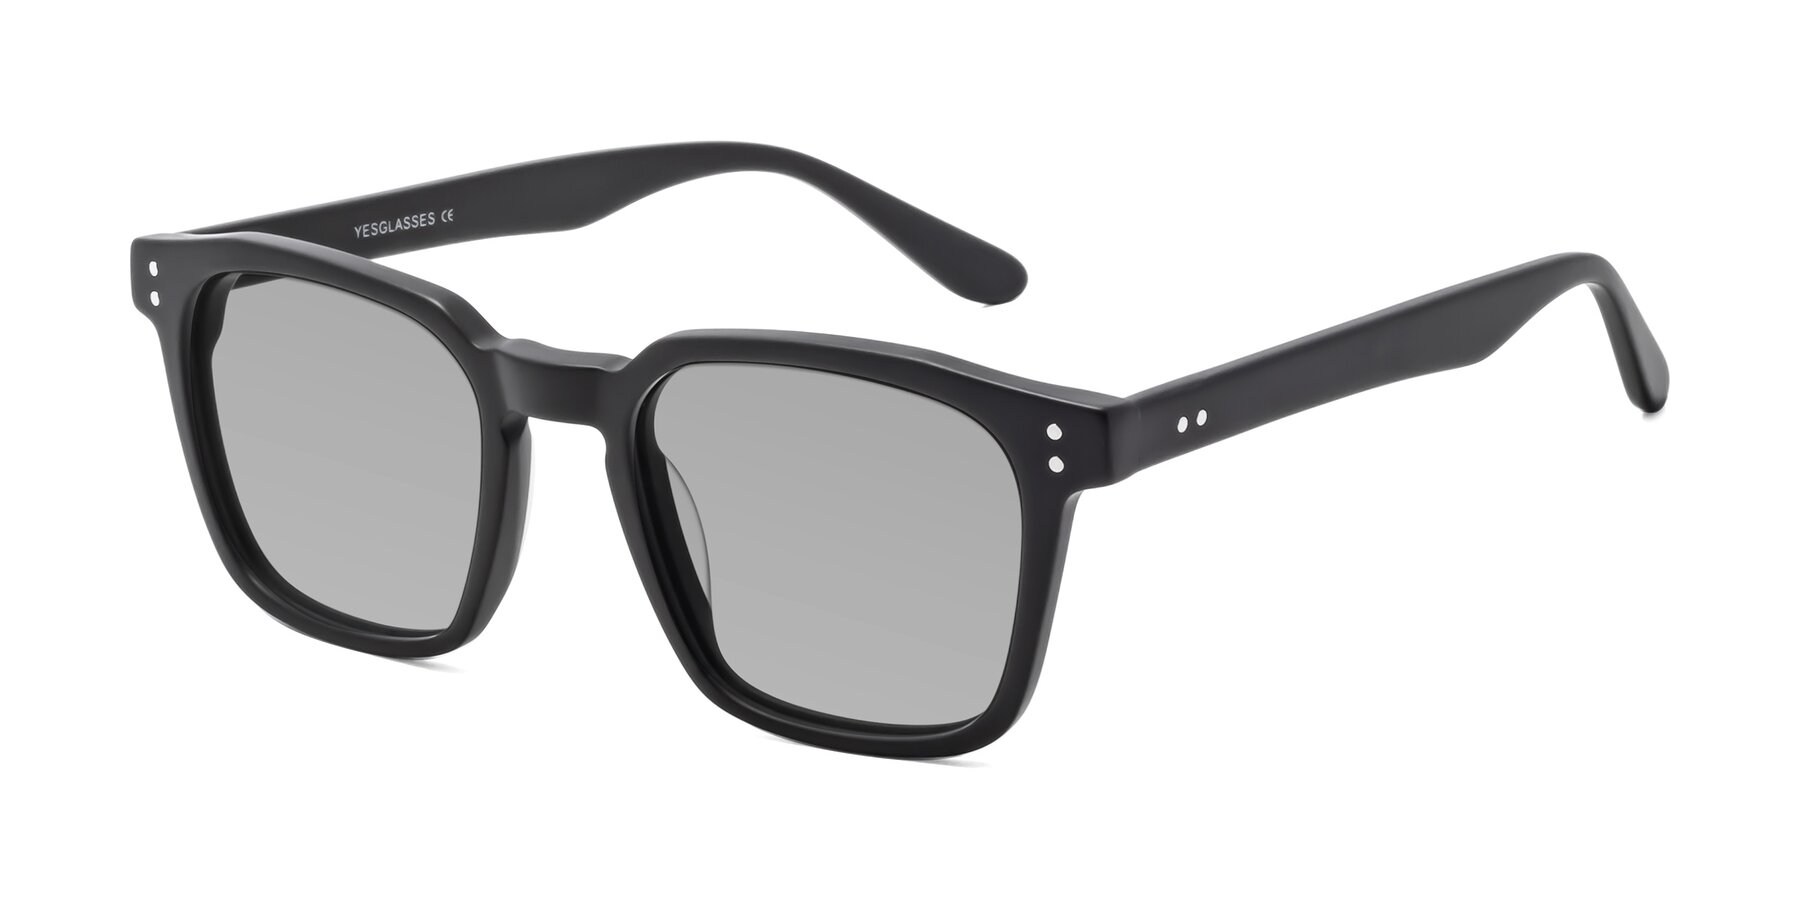 Angle of Riverside in Matte Black with Light Gray Tinted Lenses